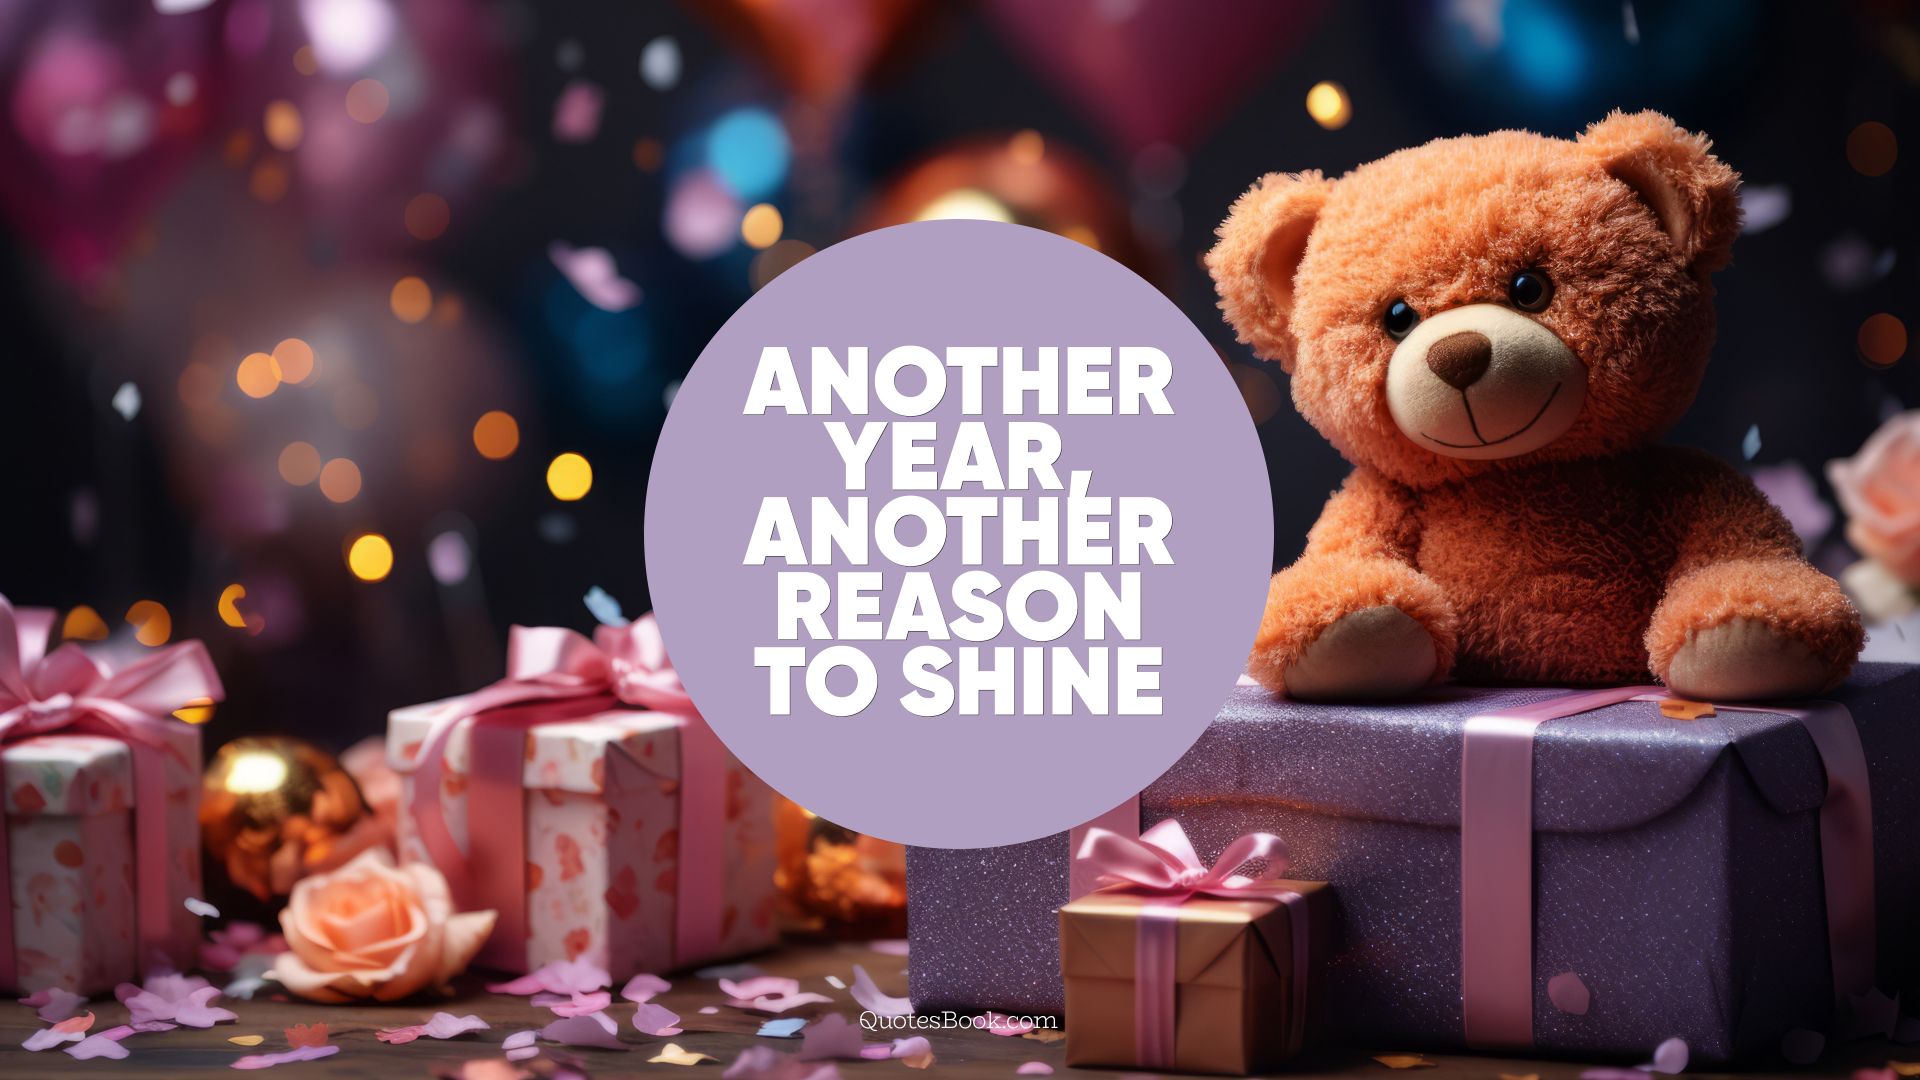 Another year, another reason to shine. - Quote by QuotesBook